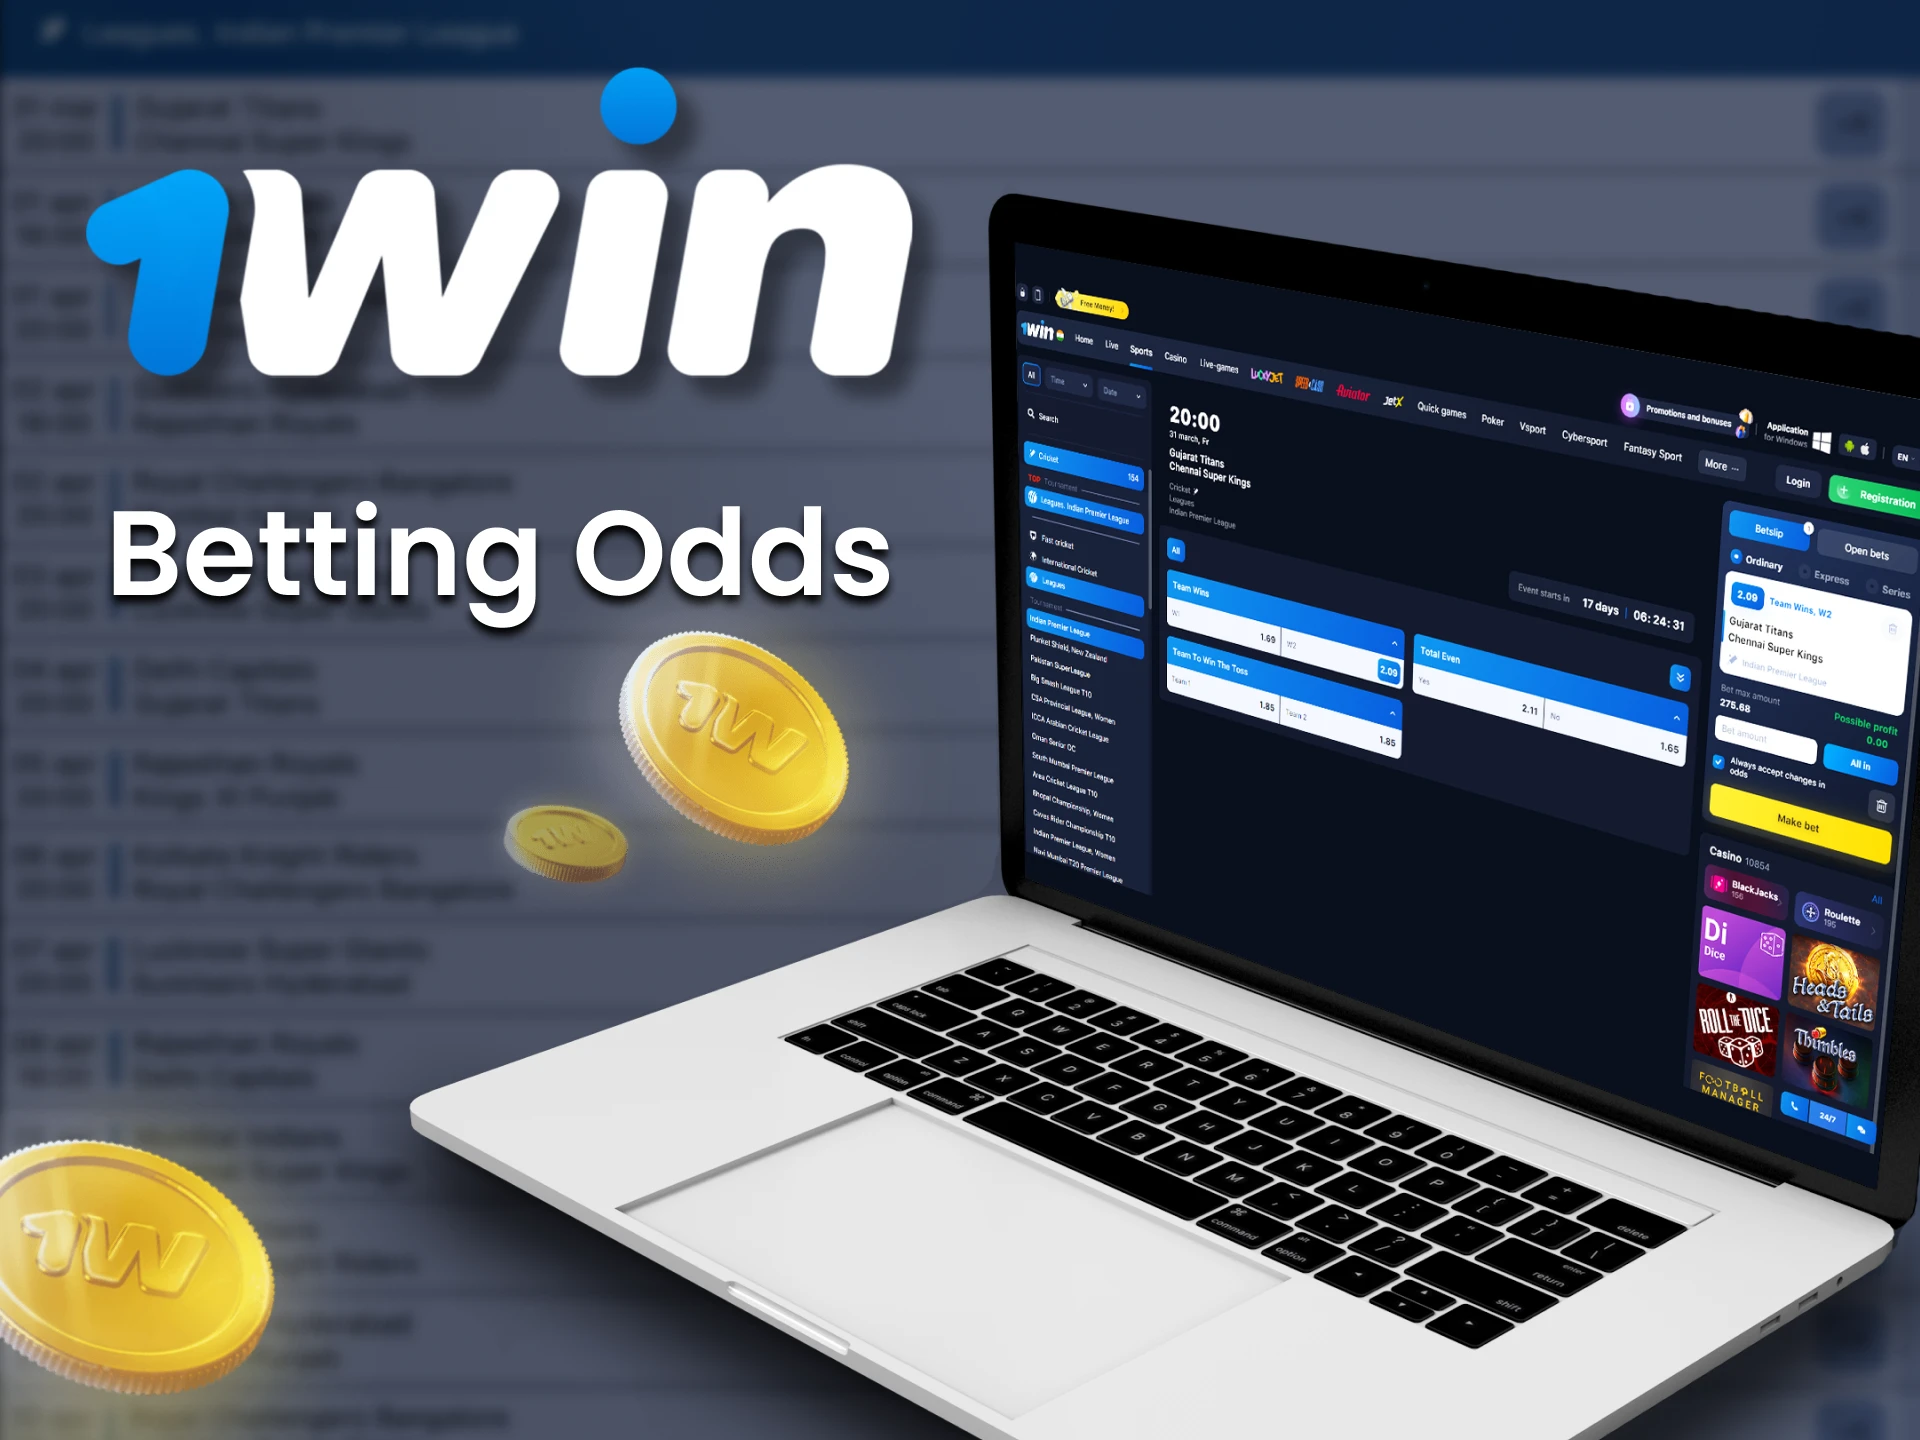 Check 1win sports odds before placing a bet.